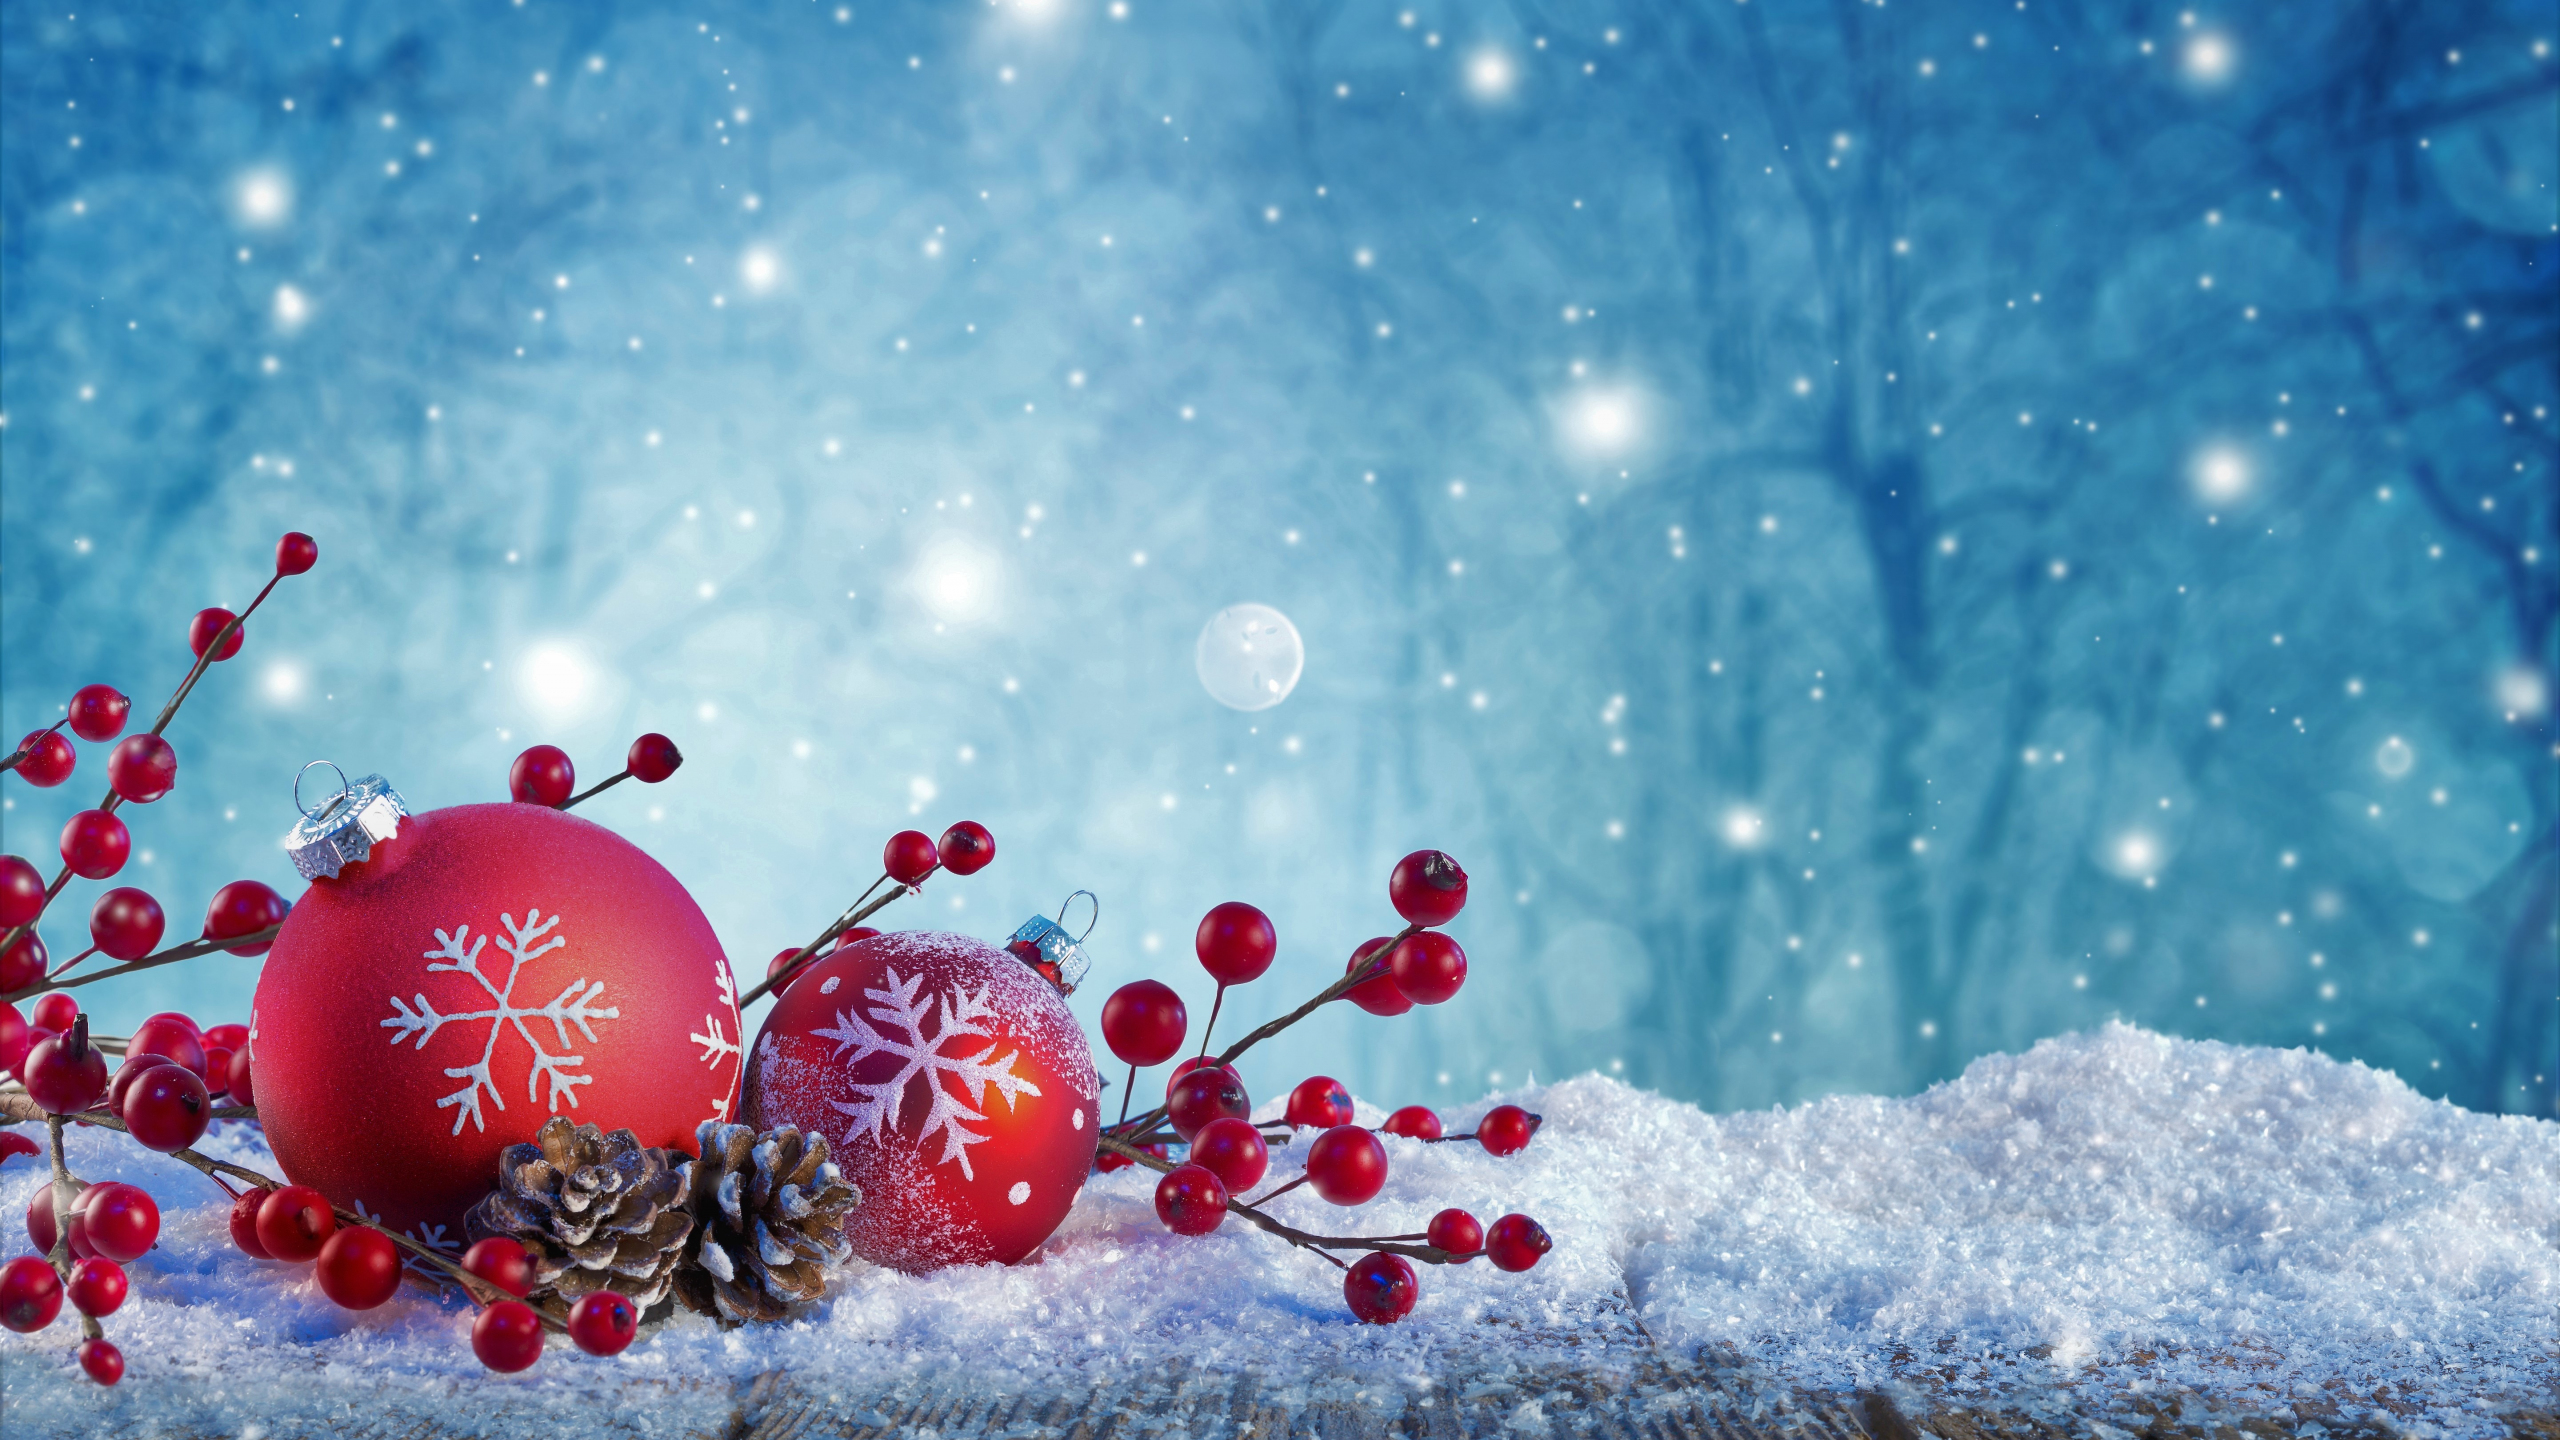 Christmas 2560x1440 Wallpapers - Wallpaper Cave